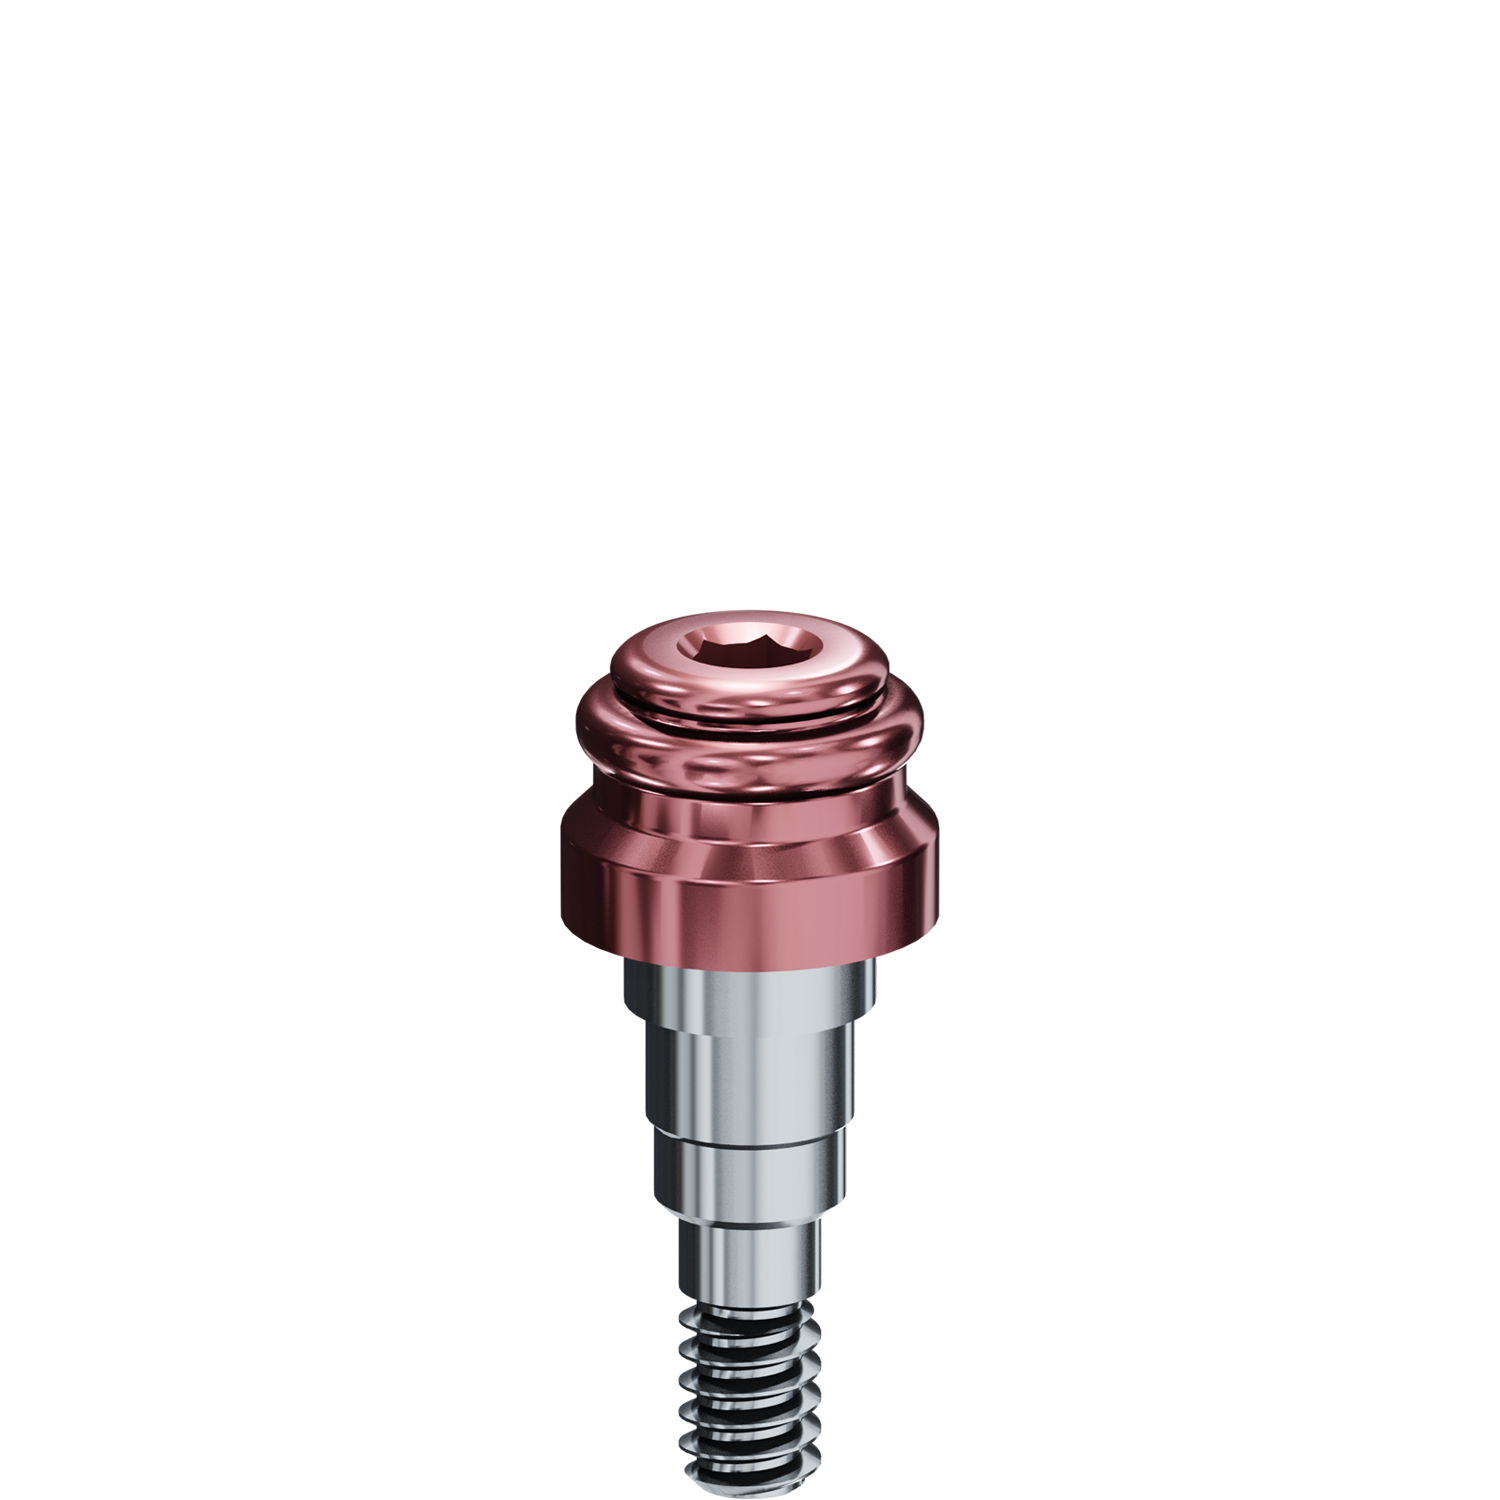 R-Tx Attachment System - Biomet 3i® - 4.1mm Certain Connection - 0.048" Drive - 1.0mm